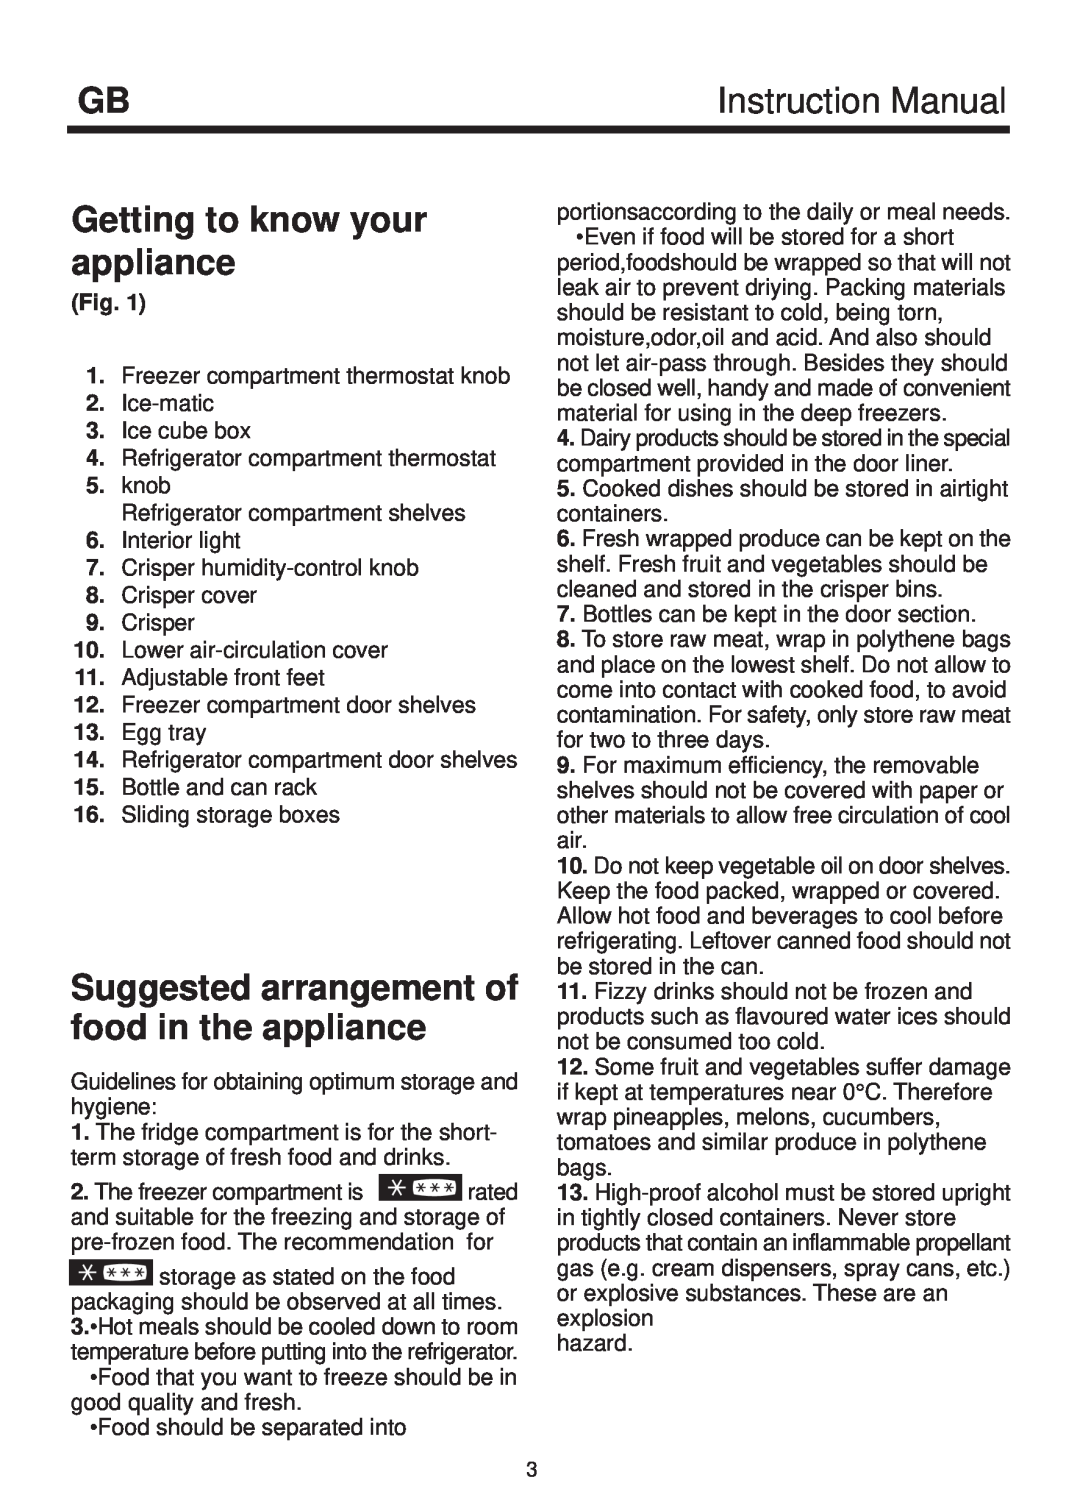 Beko D 9433 manual Getting to know your appliance, Suggested arrangement of food in the appliance, Instruction Manual, Fig 